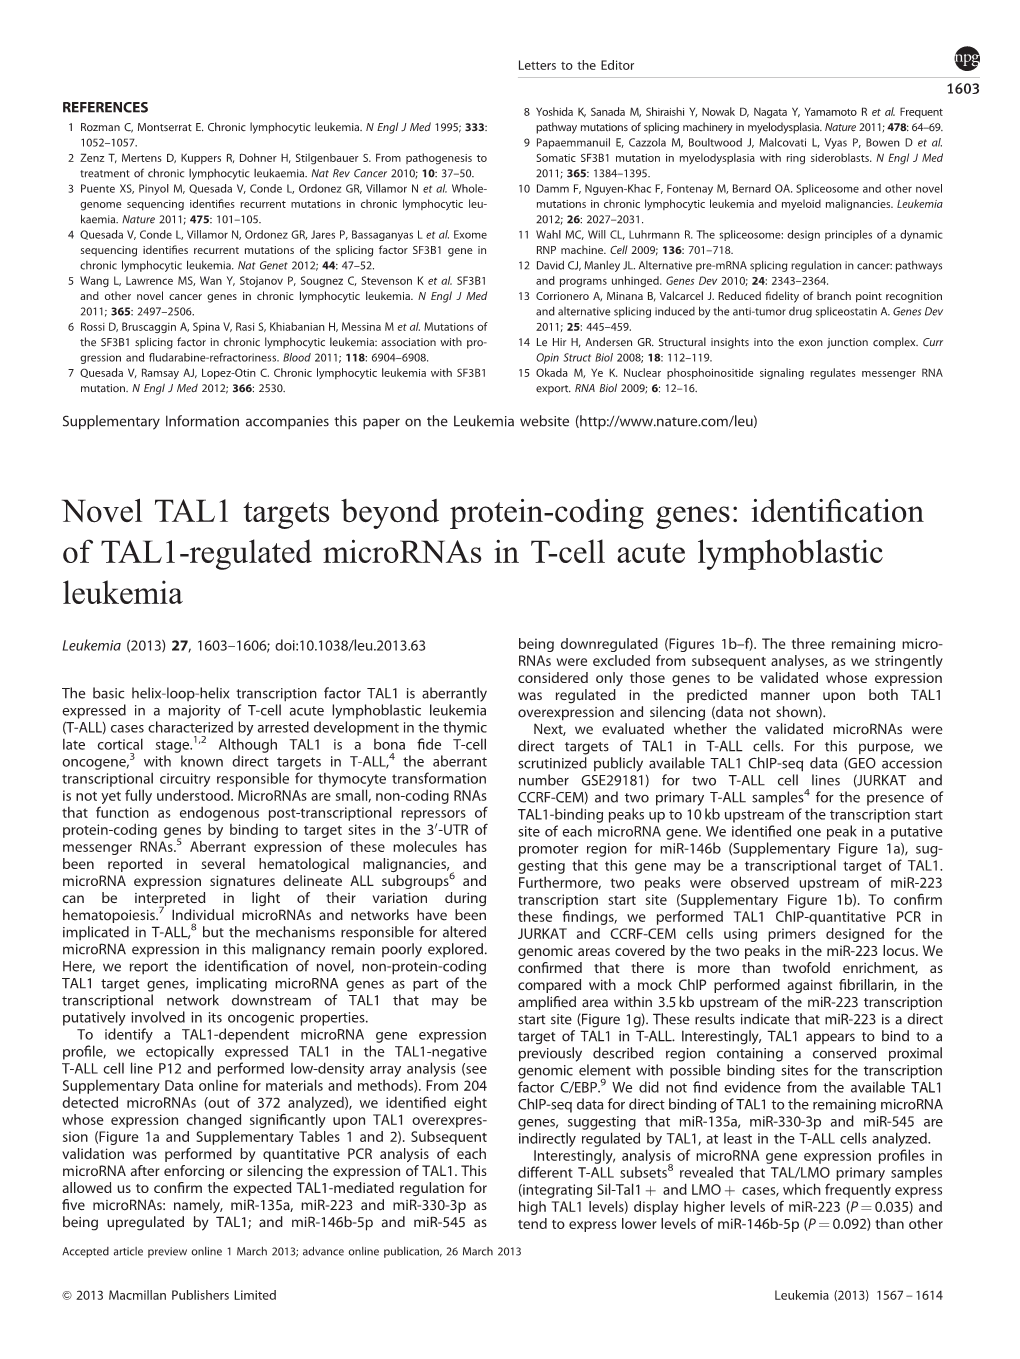 Novel TAL1 Targets Beyond Protein-Coding Genes: Identiﬁcation of TAL1-Regulated Micrornas in T-Cell Acute Lymphoblastic Leukemia